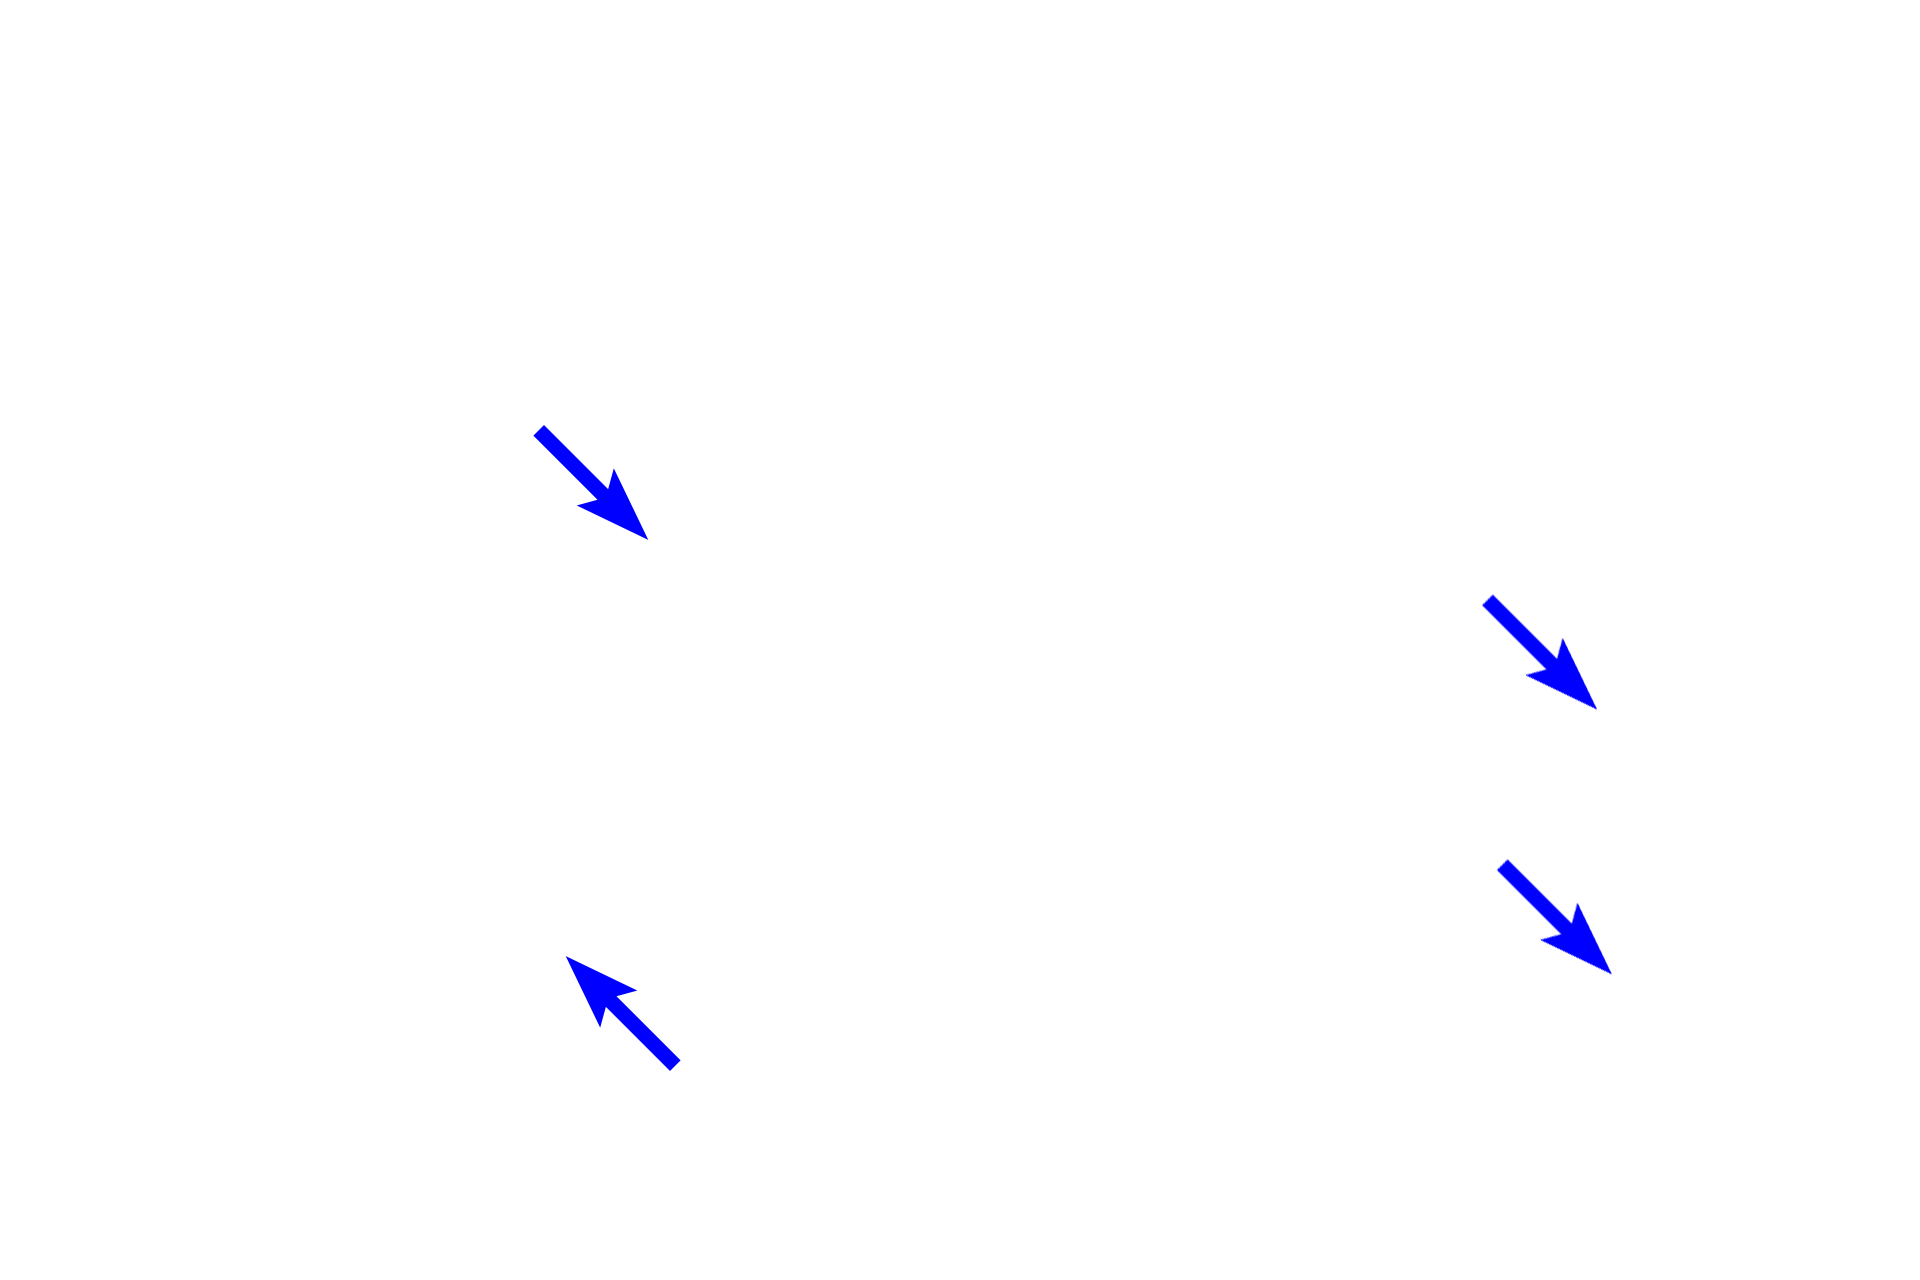 Chromosomes <p>During telophase, the nuclear envelope and nucleoli reform, and the chromosomal DNA decondenses.  The developing cleavage furrow indicates the division of the cytoplasm (cytokinesis) and the formation of identical daughter cells.</p>
